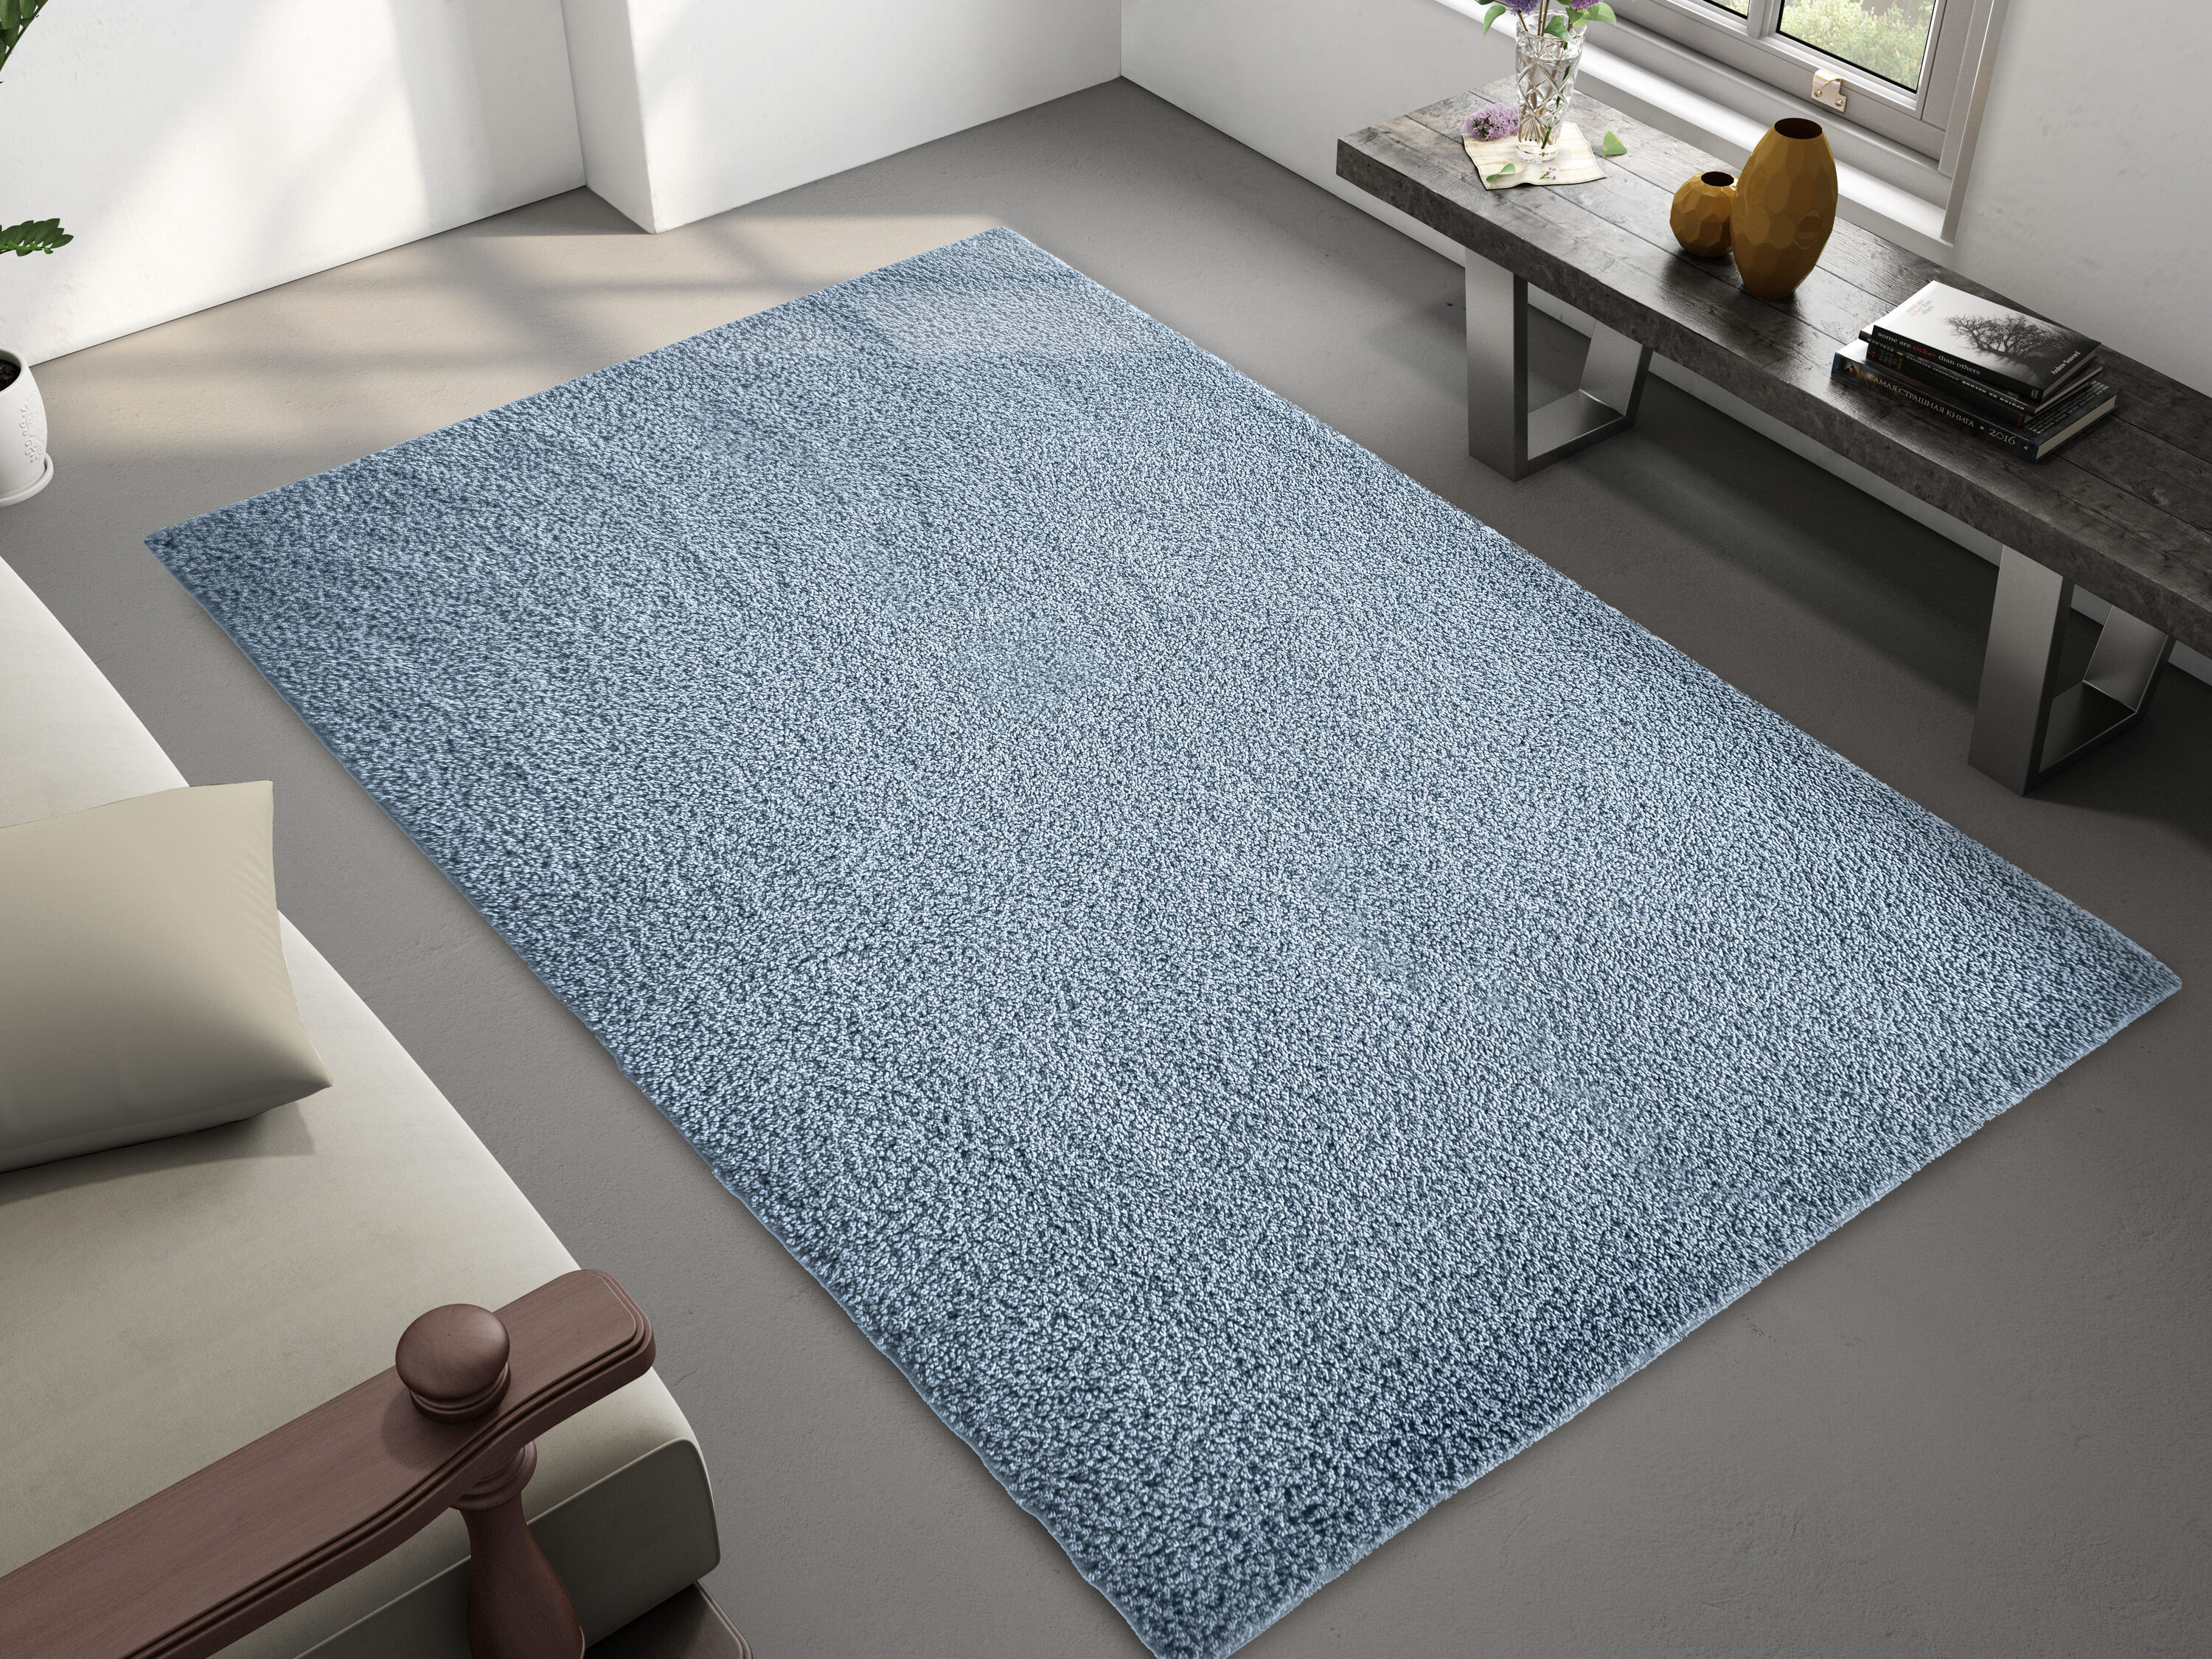 Rug with rubber backing • Compare & see prices now »